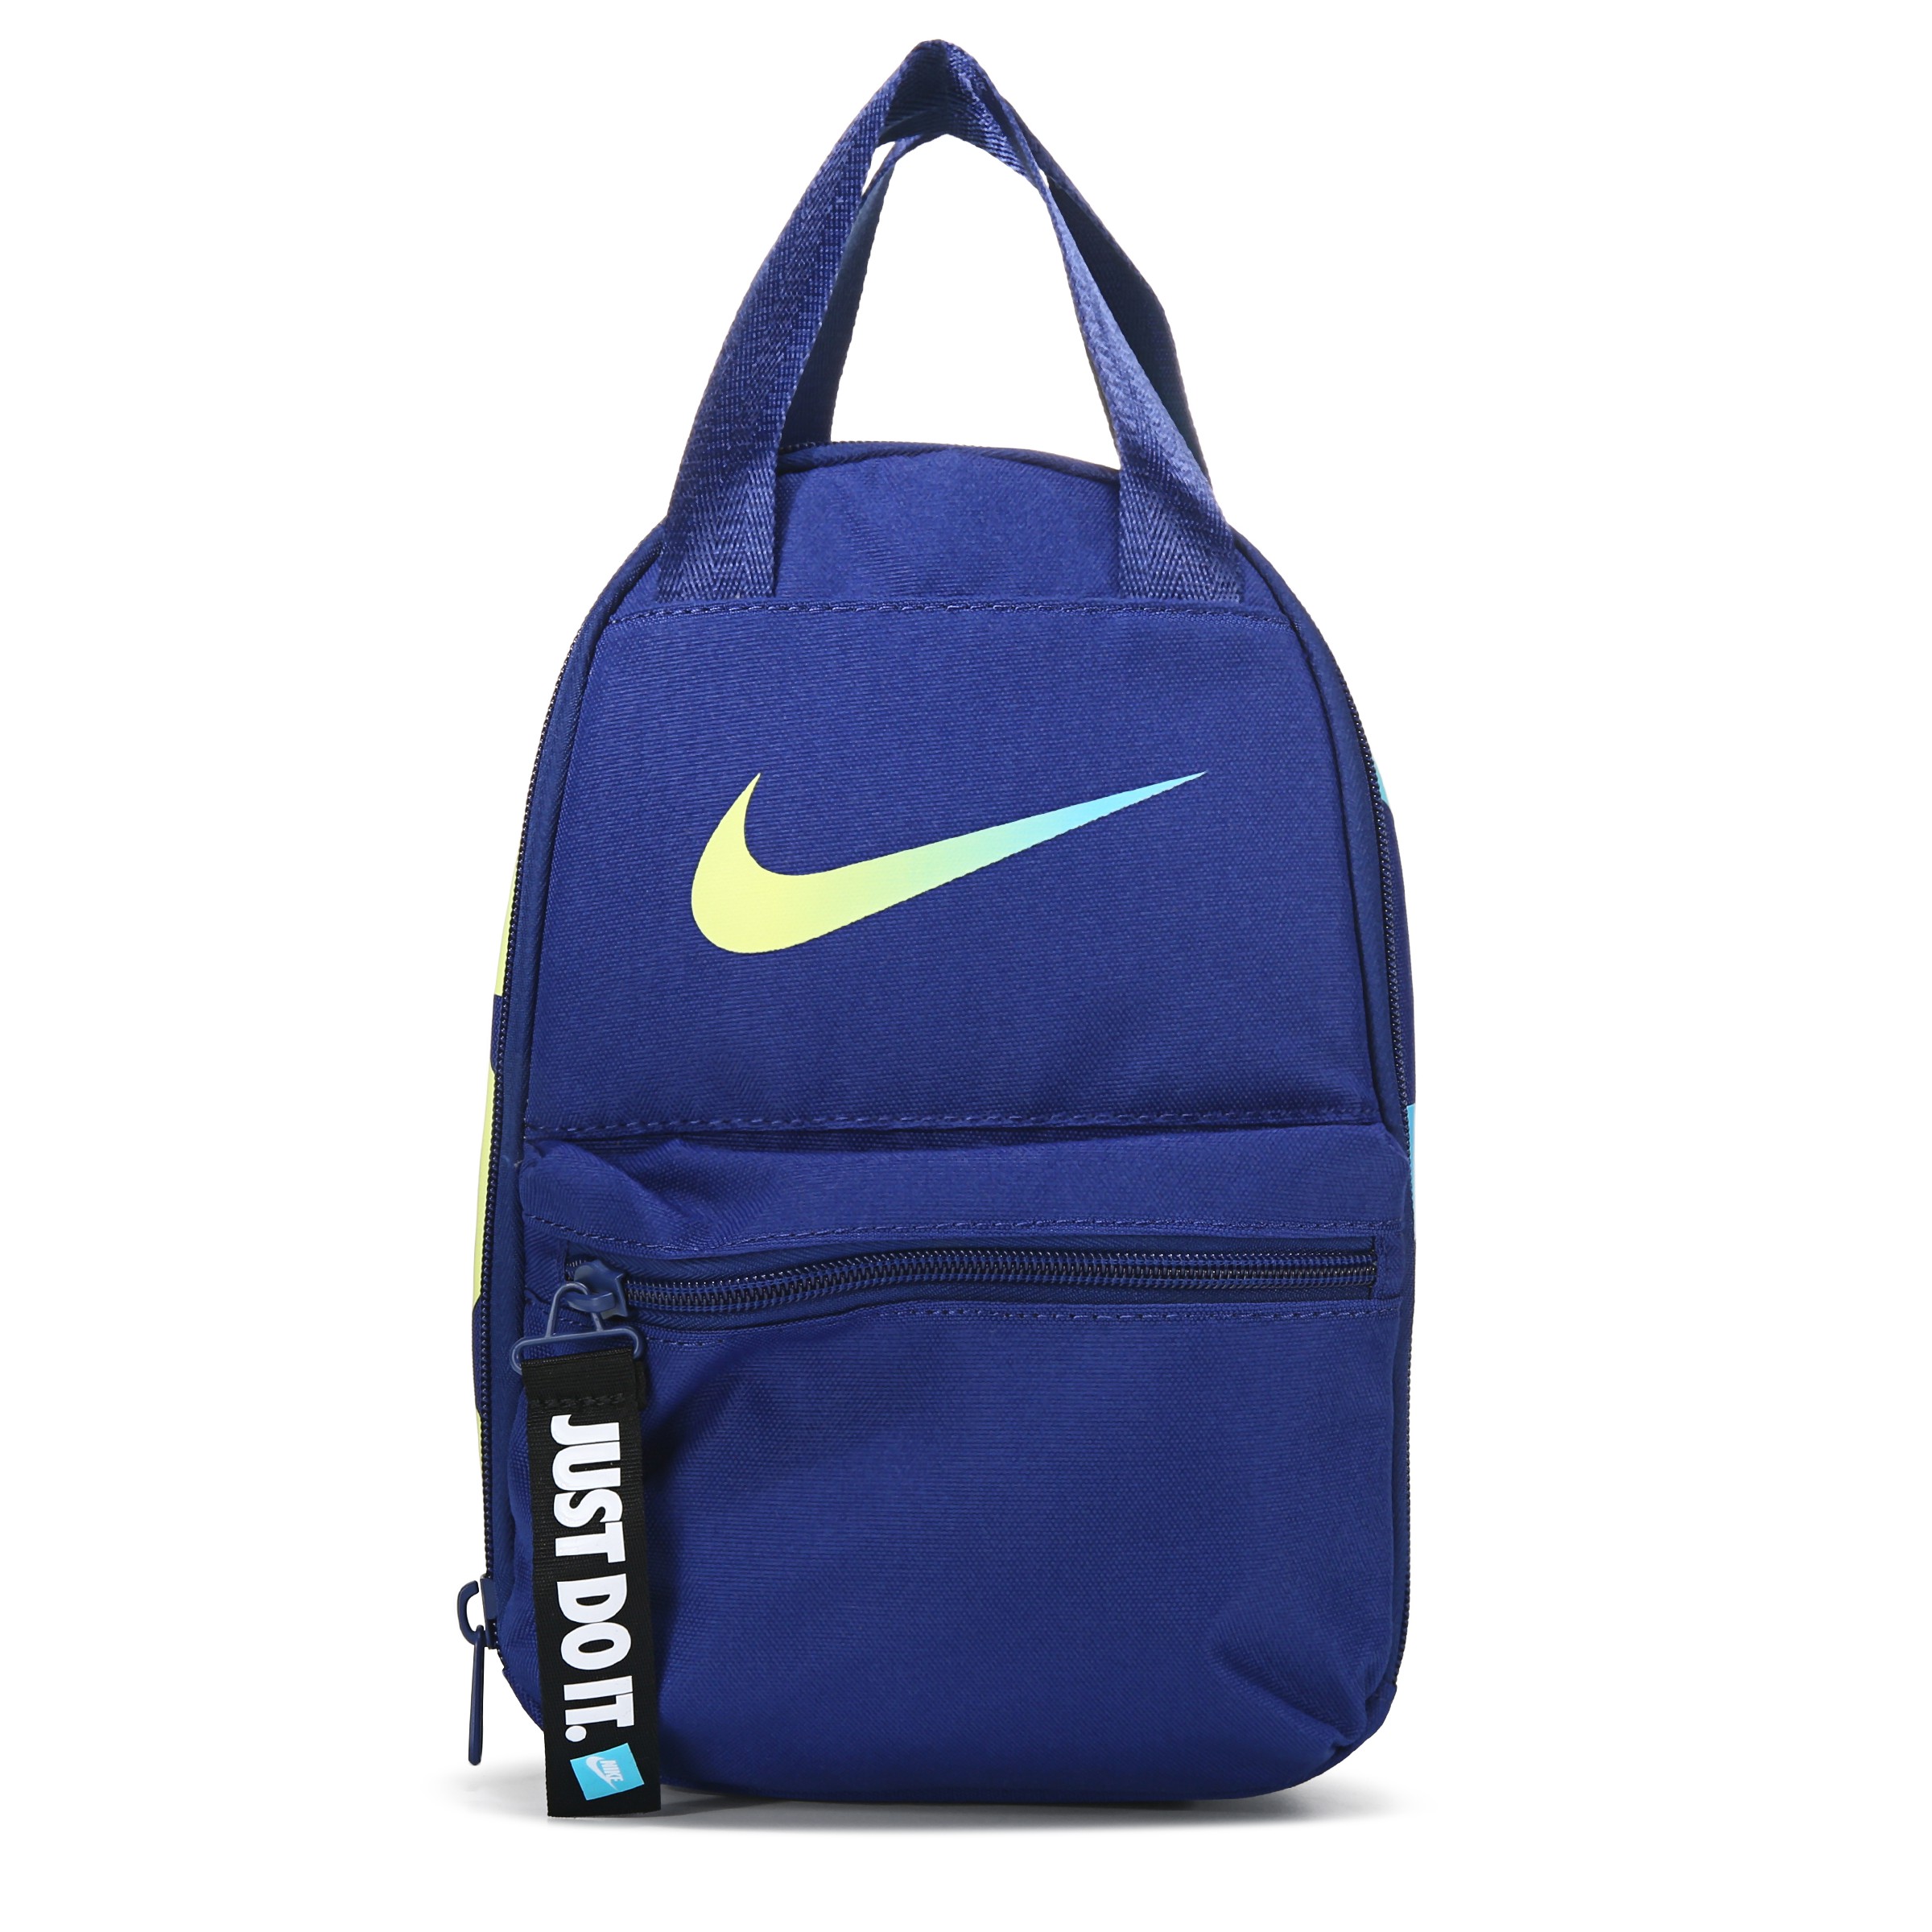 Nike Just Do It Bumper Sticker Fuel Pack Insulated Lunch Bag